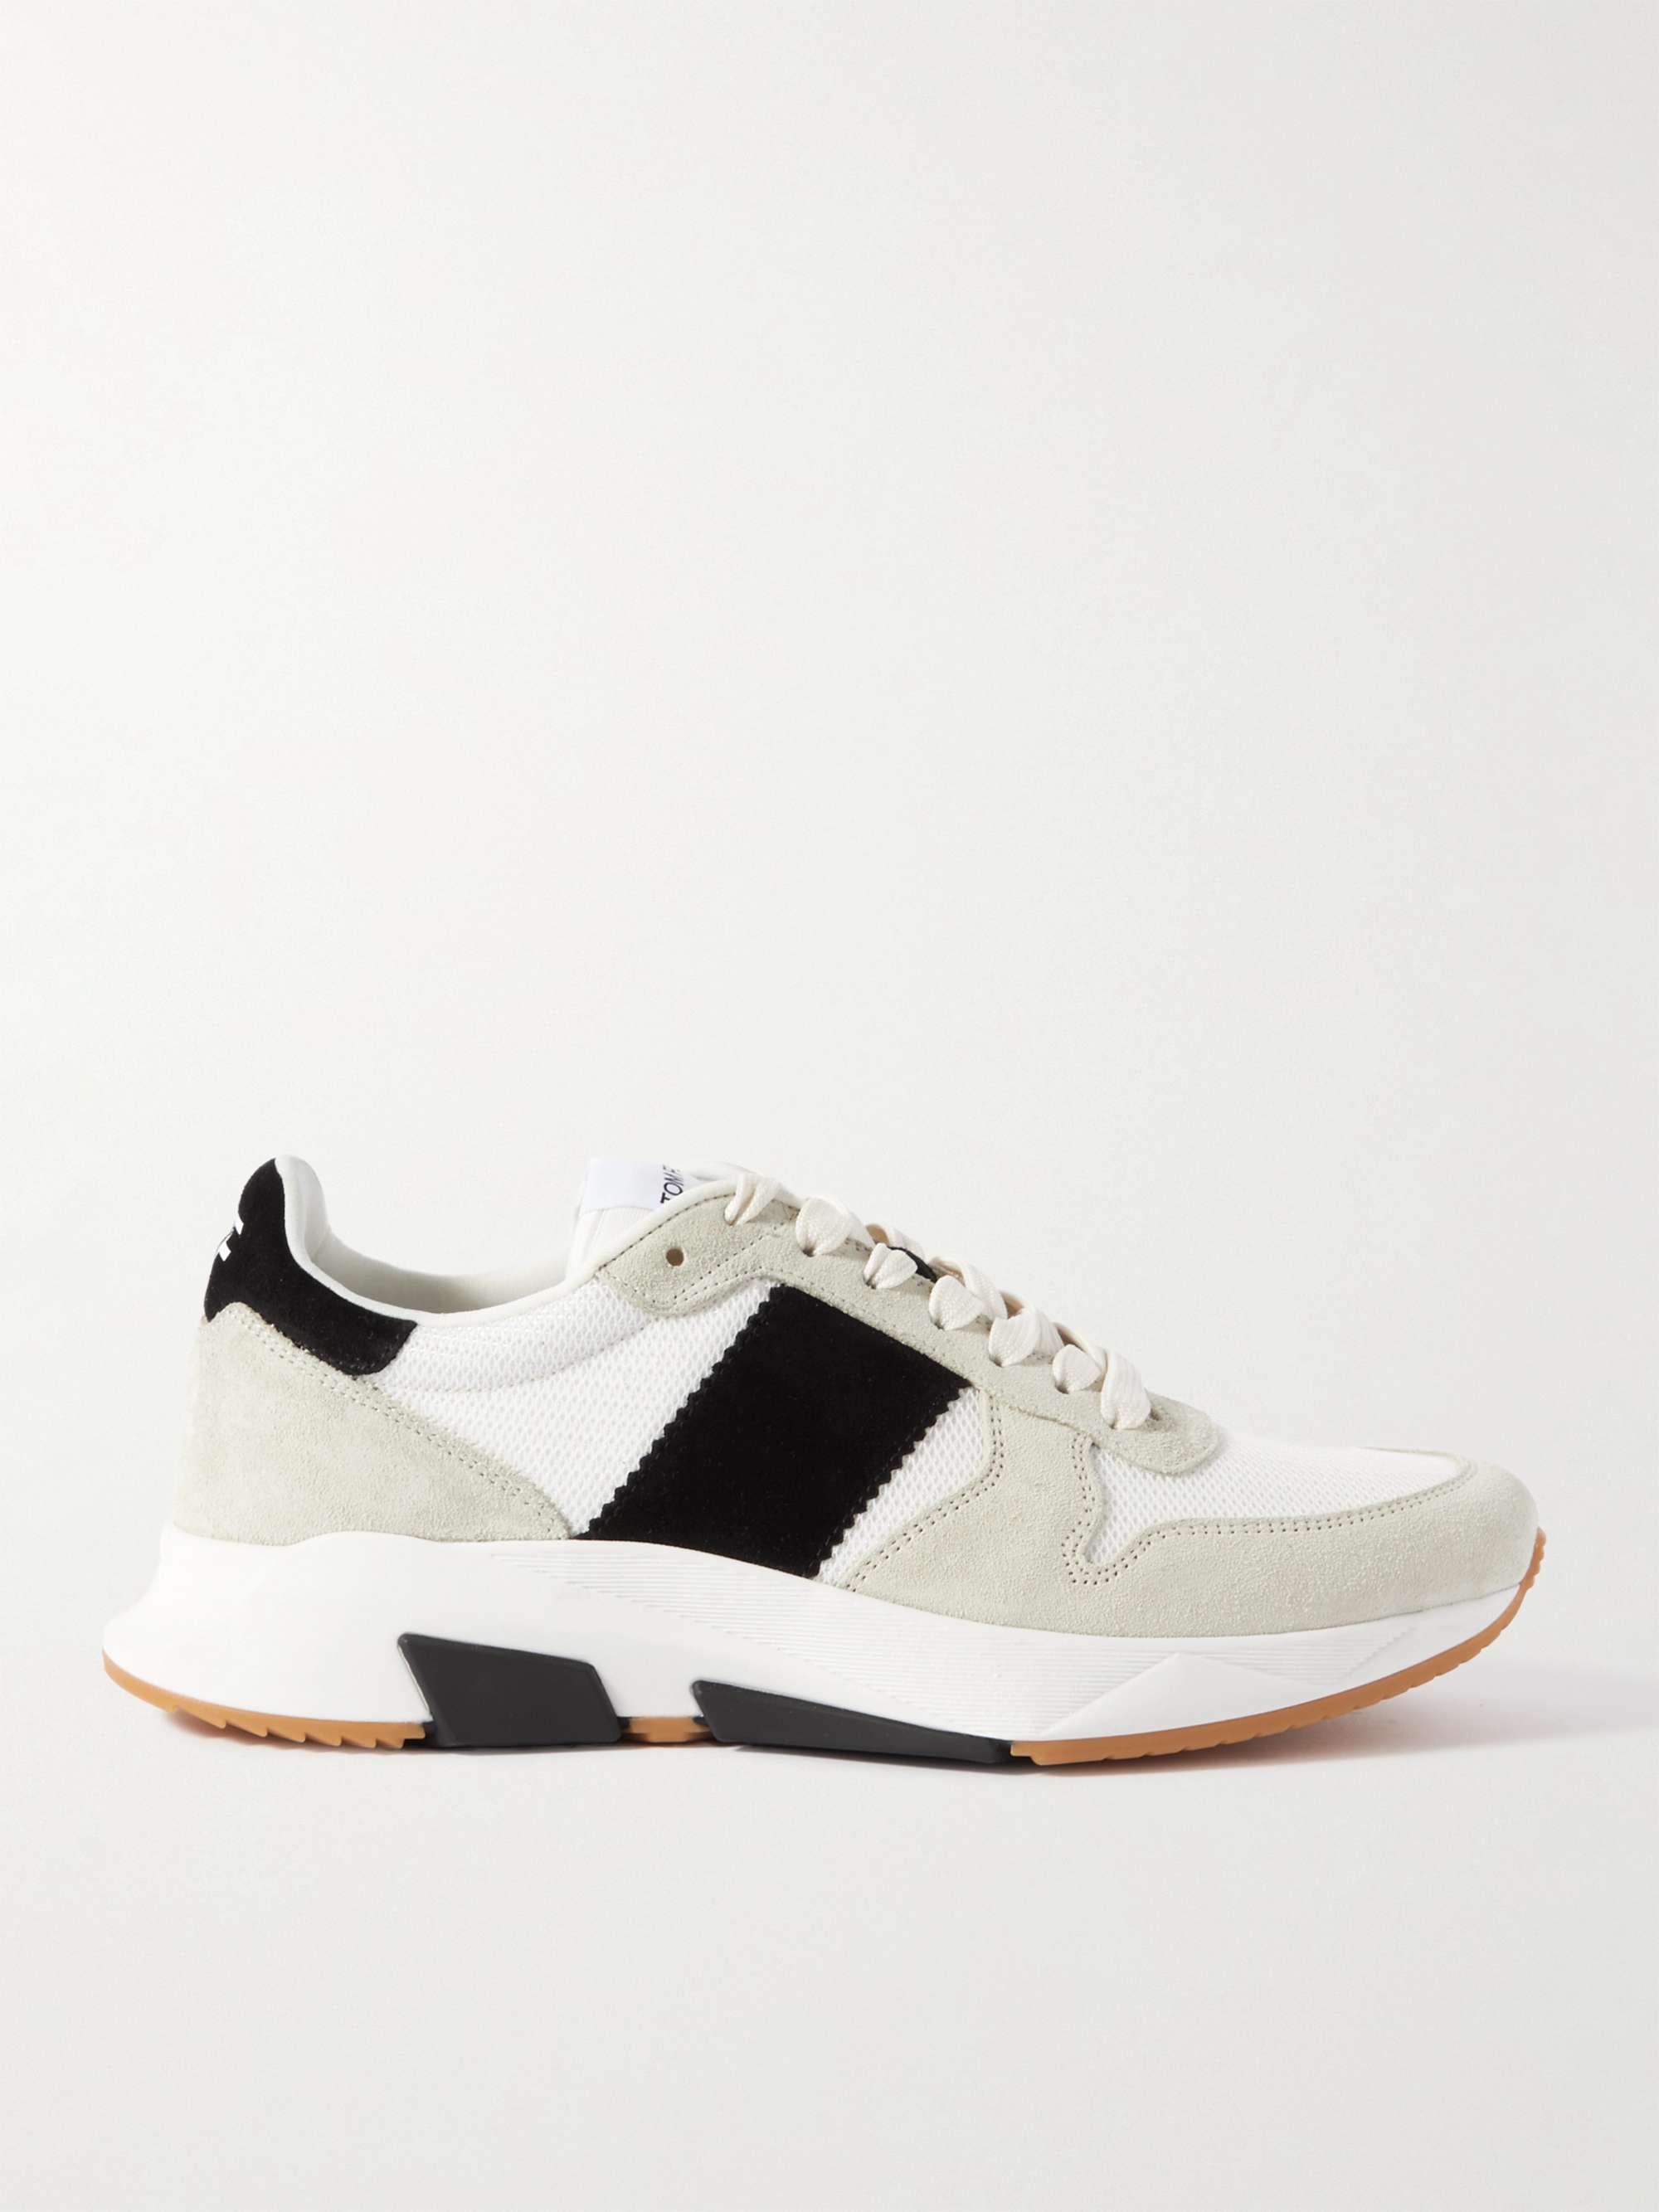 TOM FORD Jagga Suede and Mesh Sneakers for Men | MR PORTER